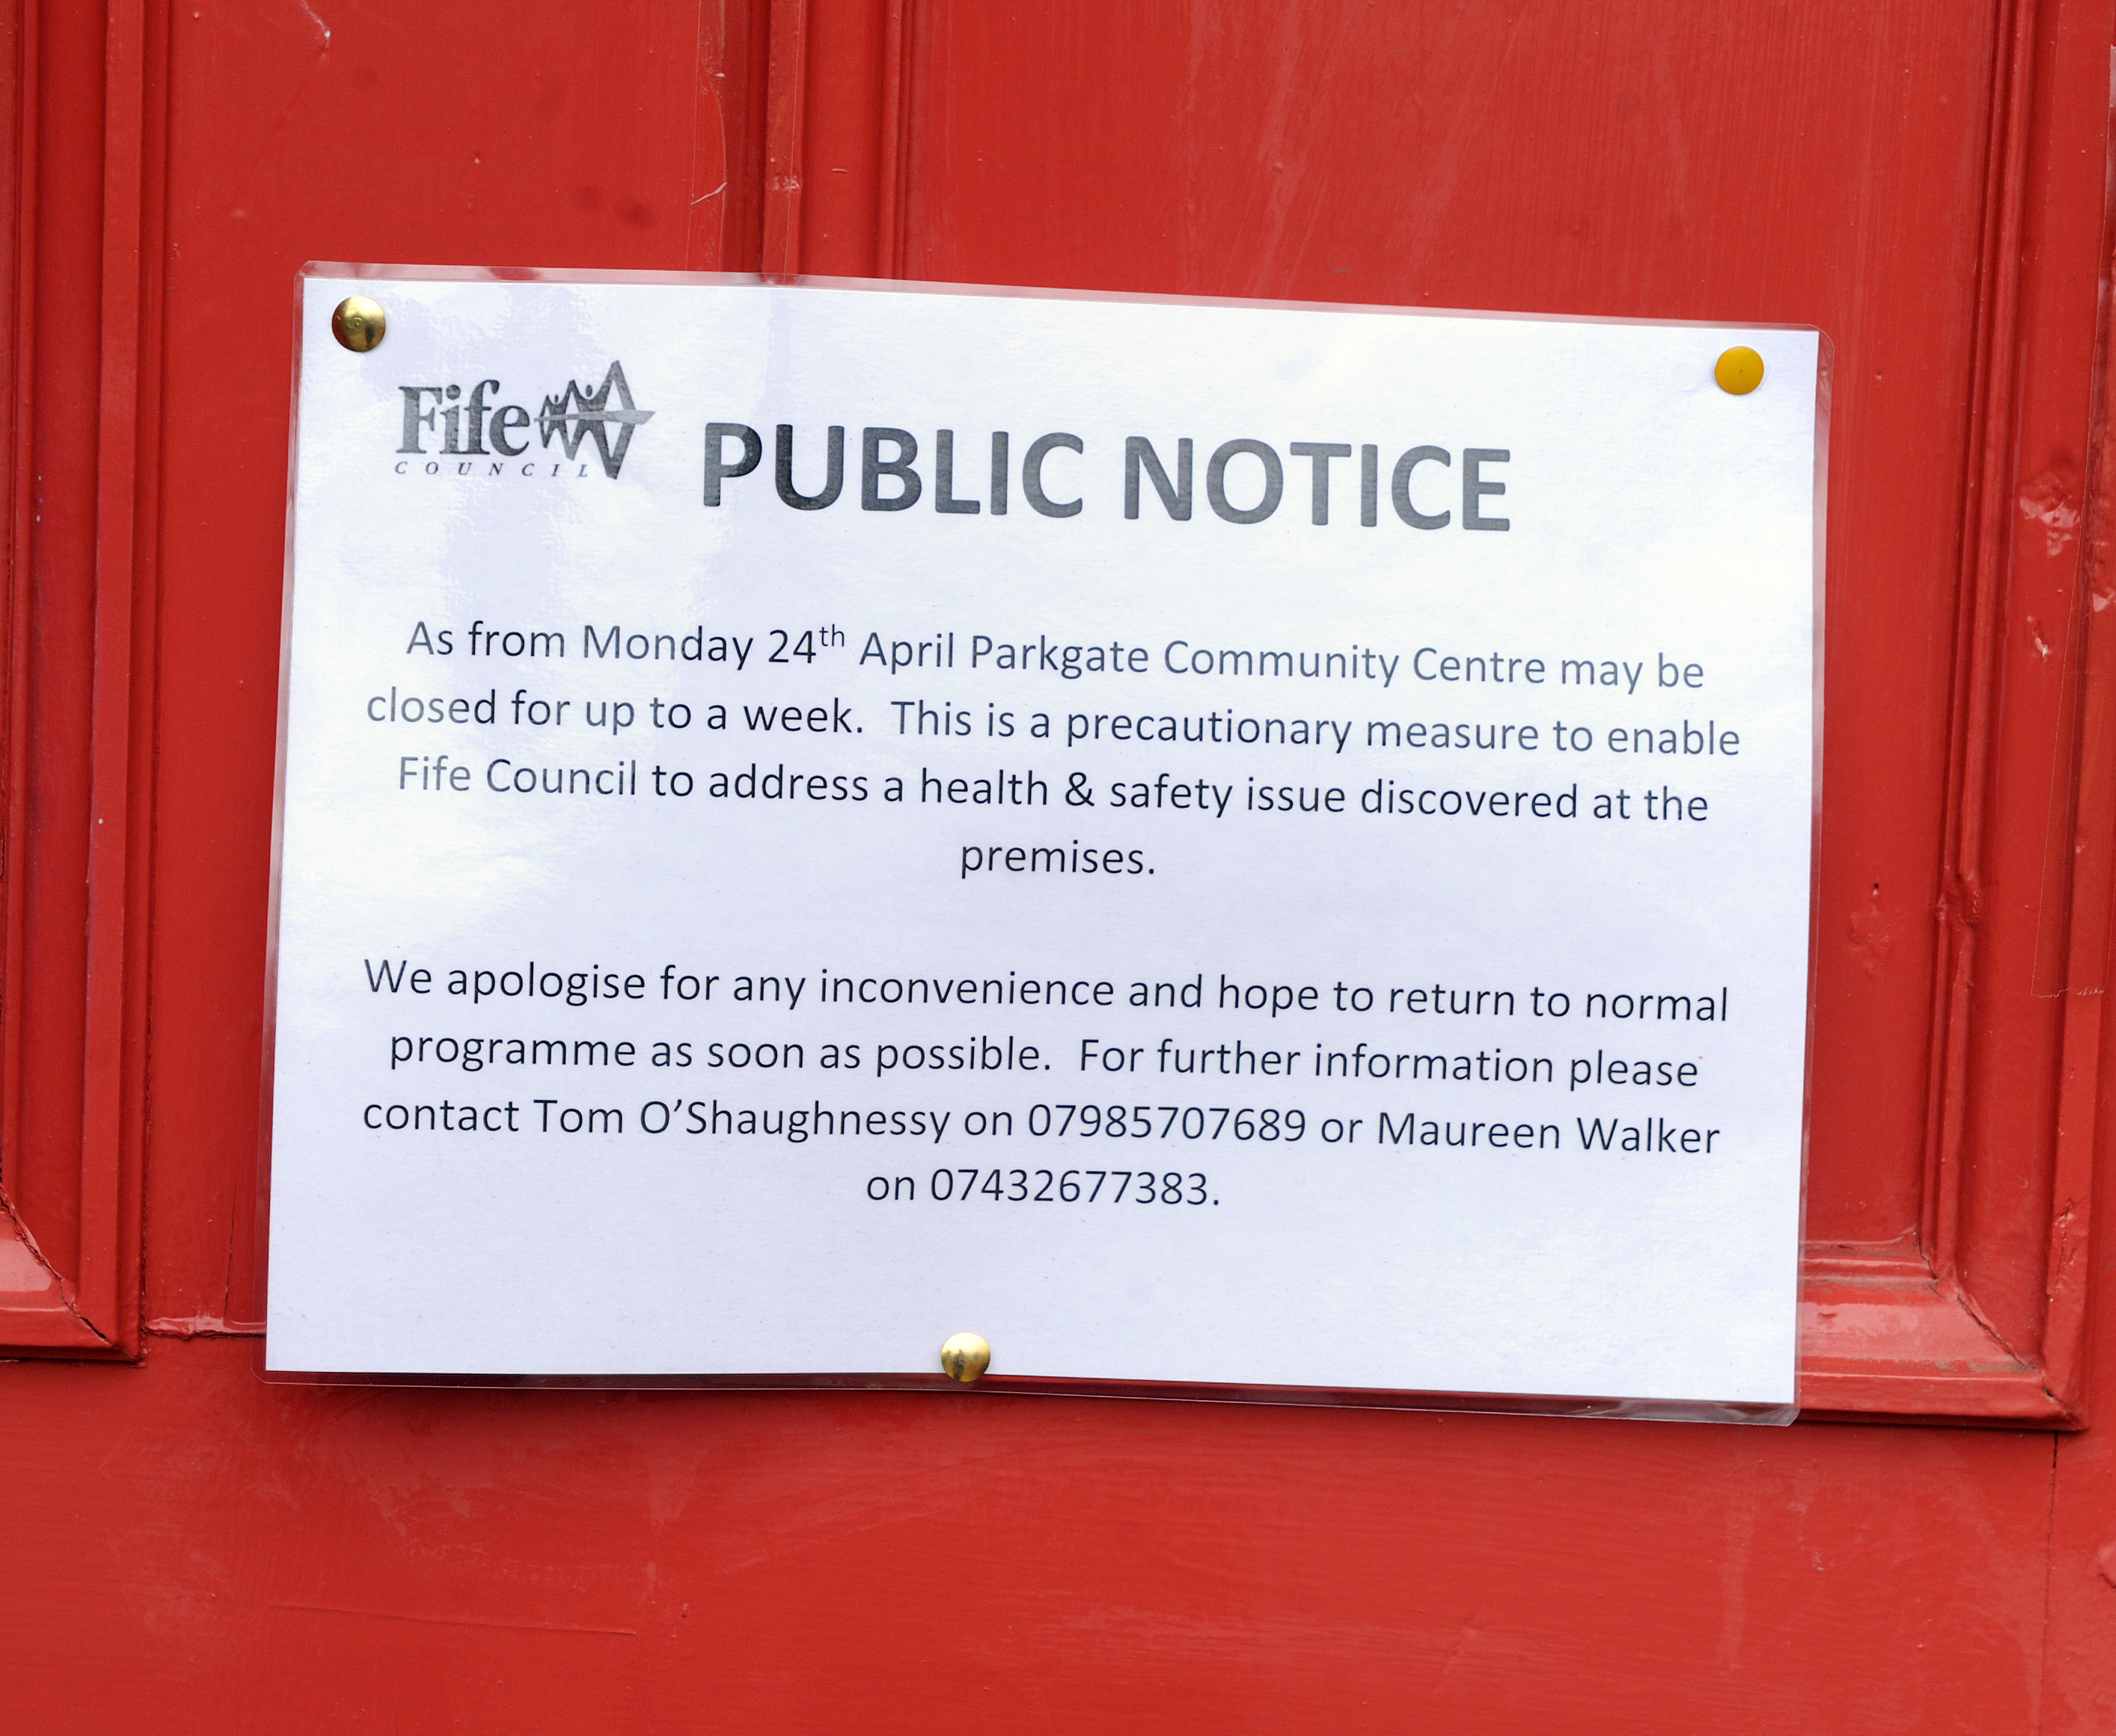 The community hub has been closed temporarily